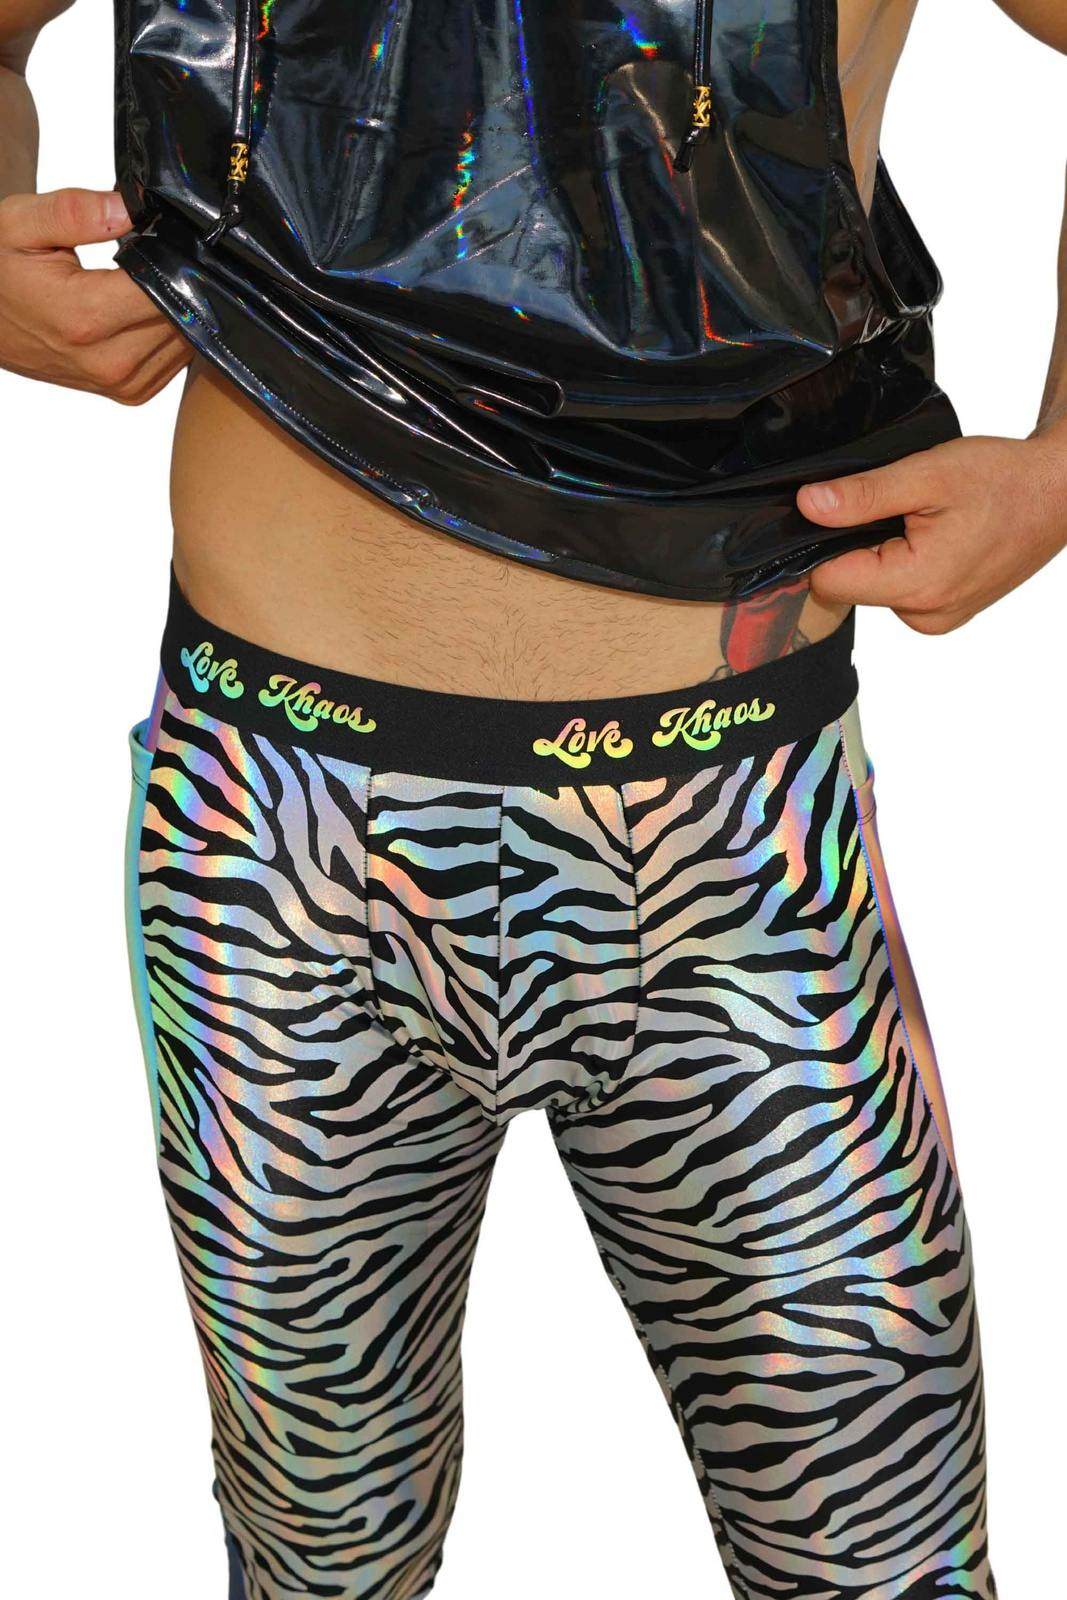 Reflective mens leggings with pouch and pockets from Love Khaos